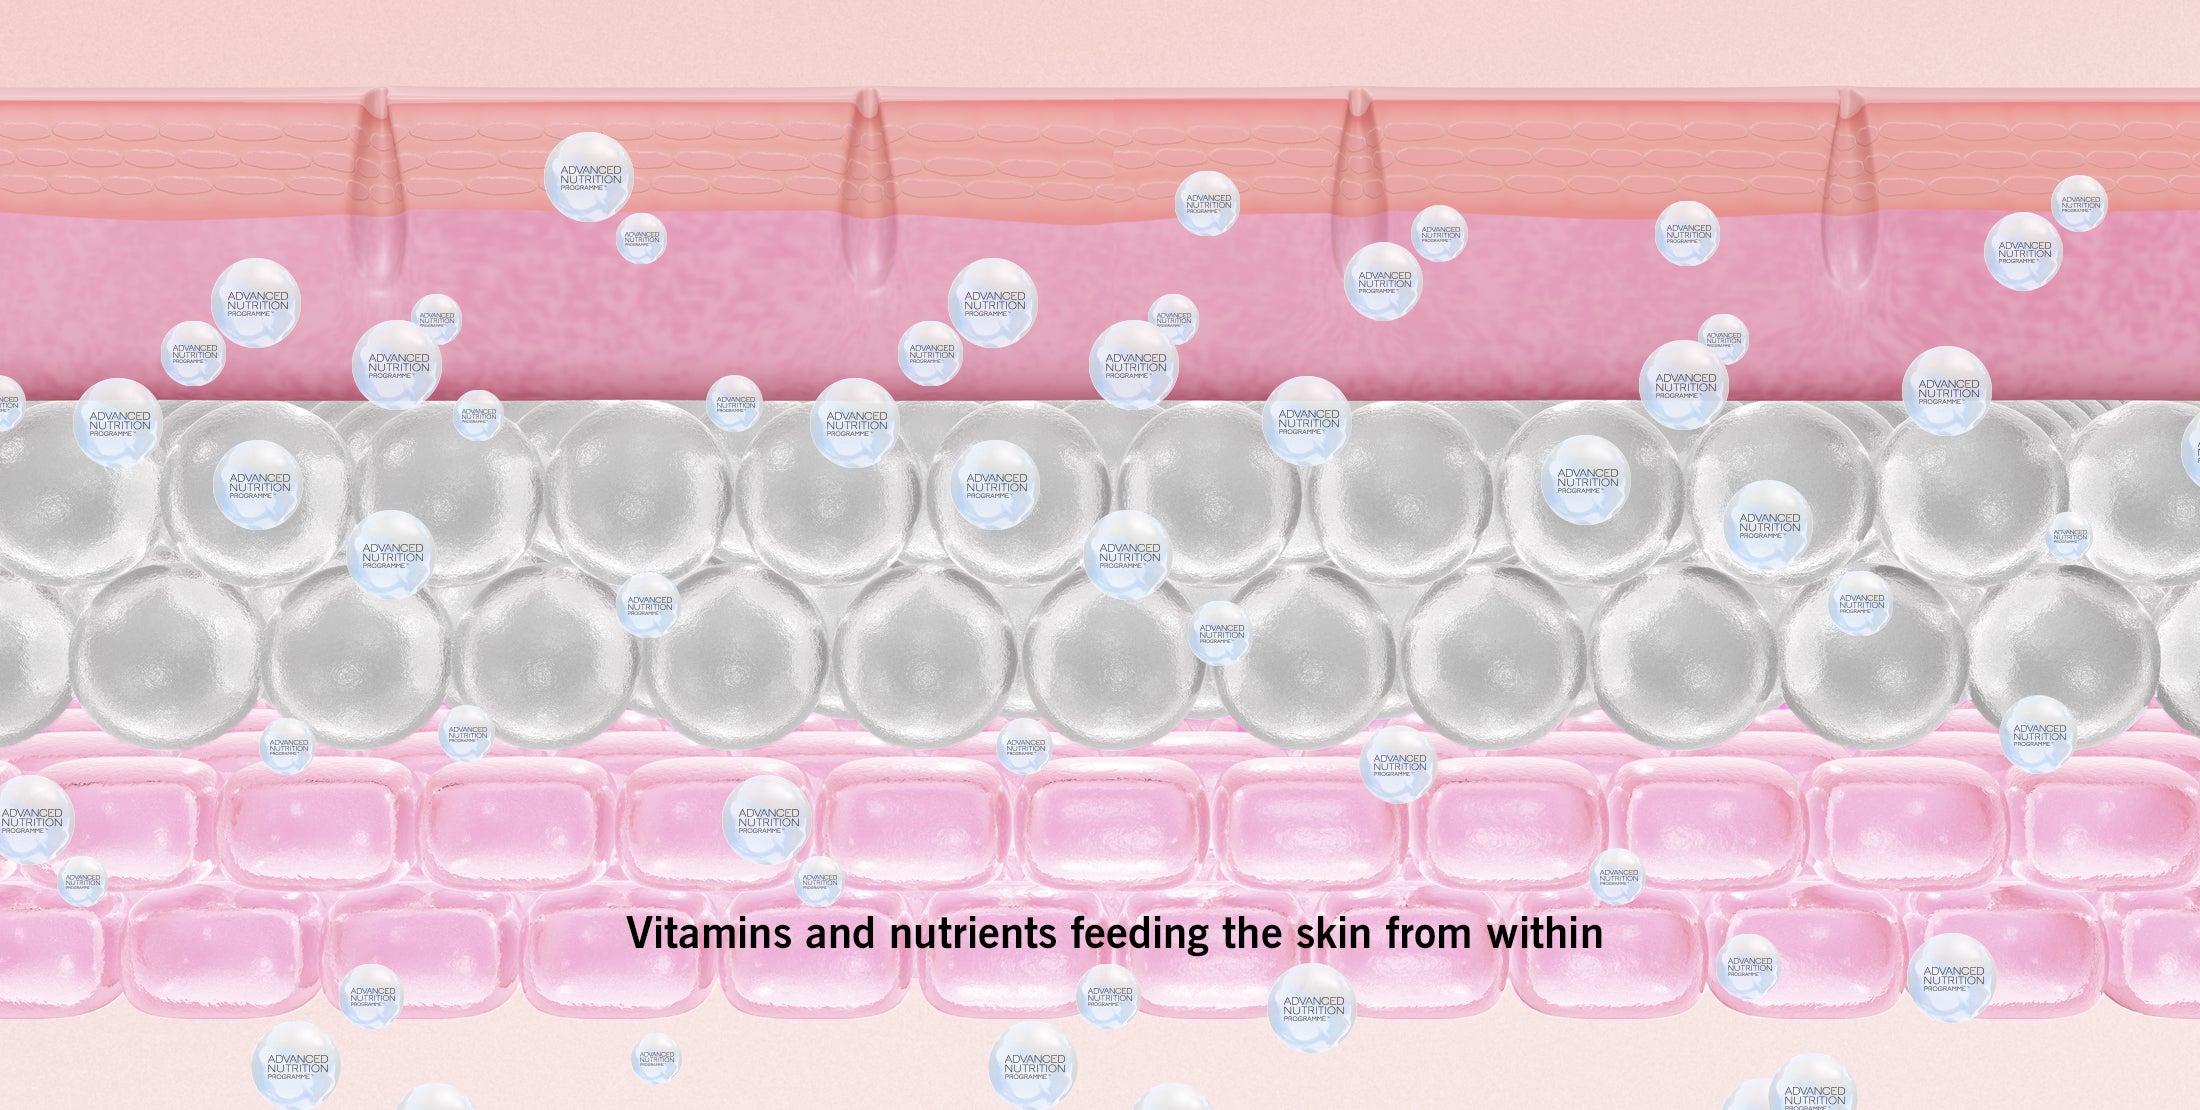 Vitamins and minerals feeding the skin from within